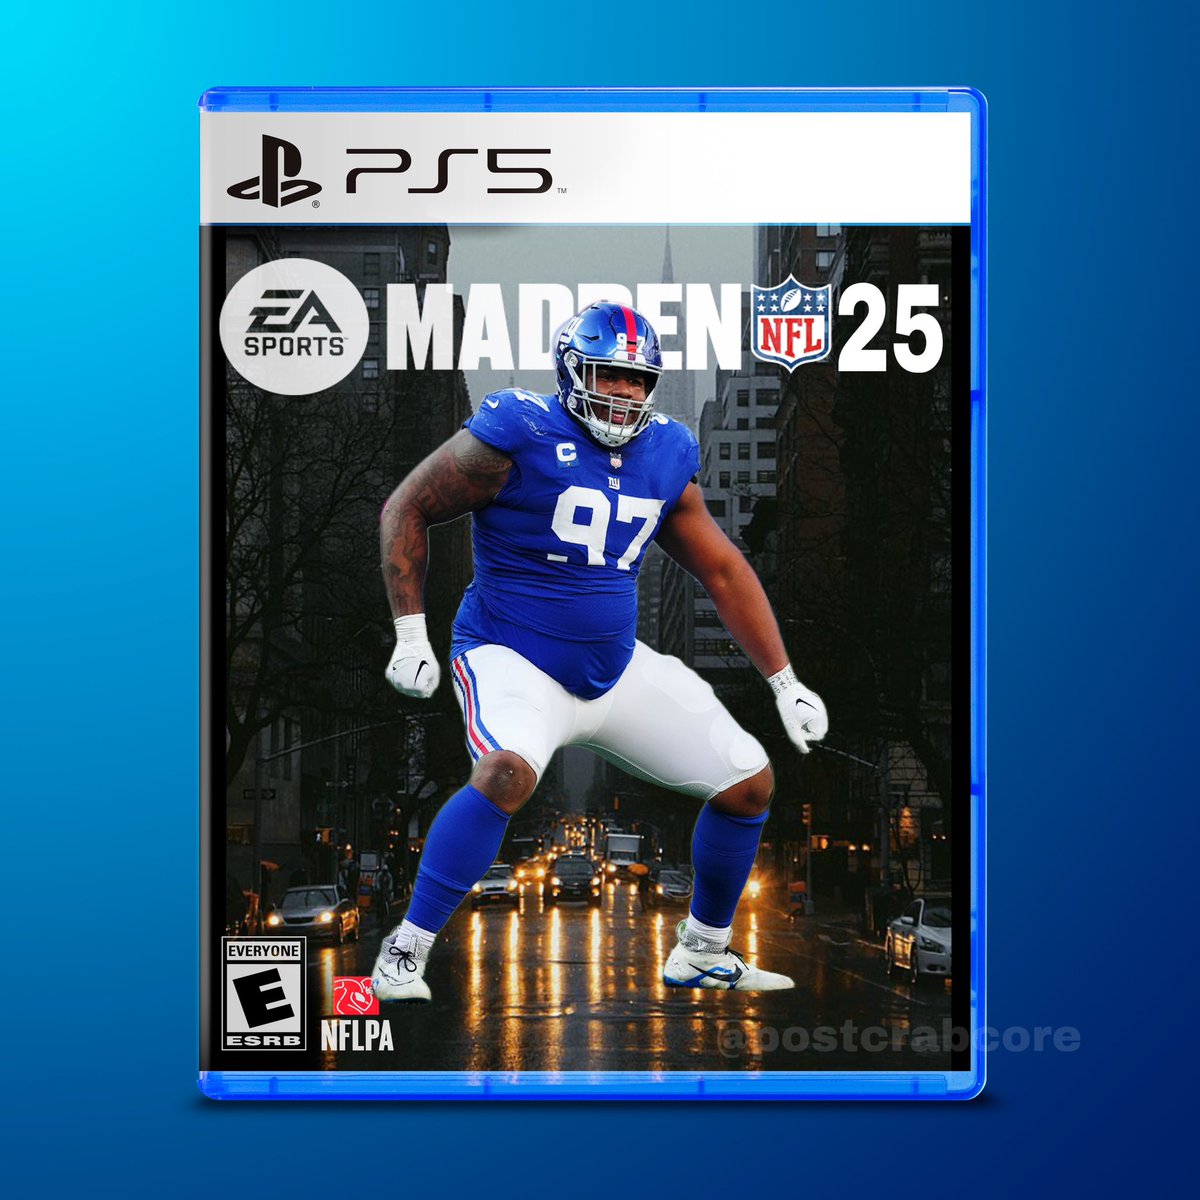 Anyone else agree this should be the new Madden cover? 

🤣🔥
🗽
#NYGiants